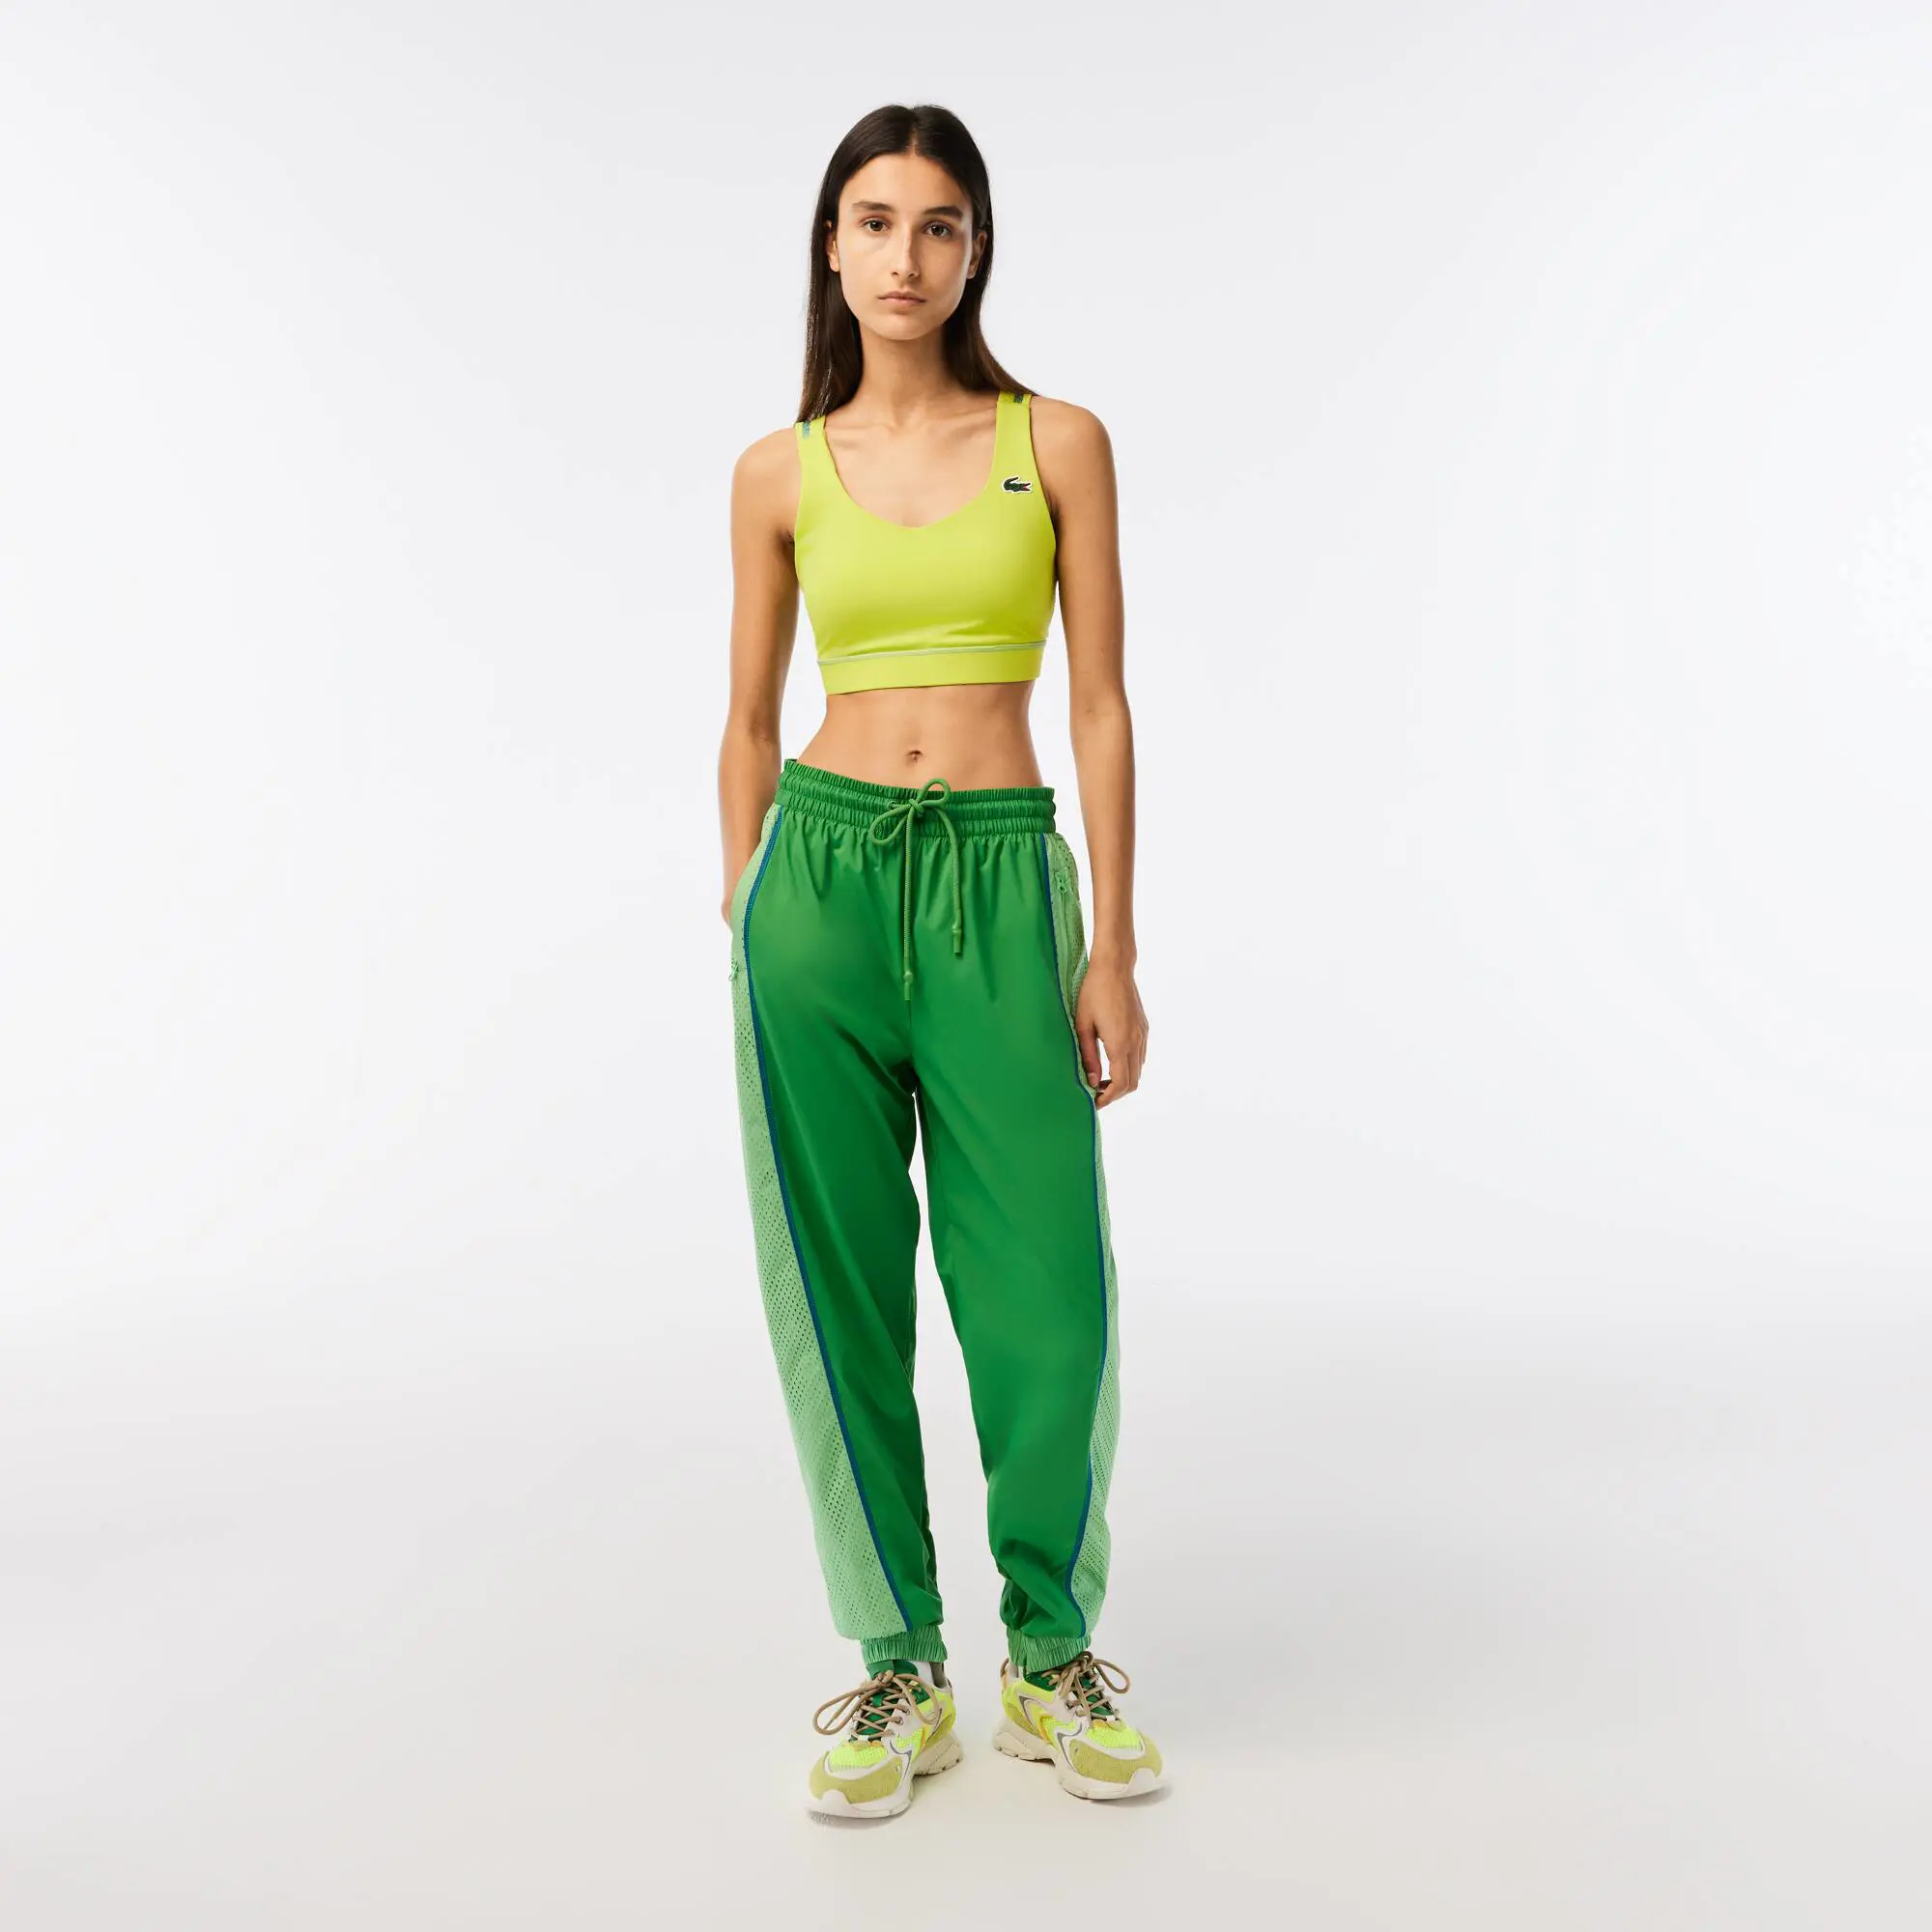 Lacoste Women’s Lacoste Perforated Effect Track Pants. 1